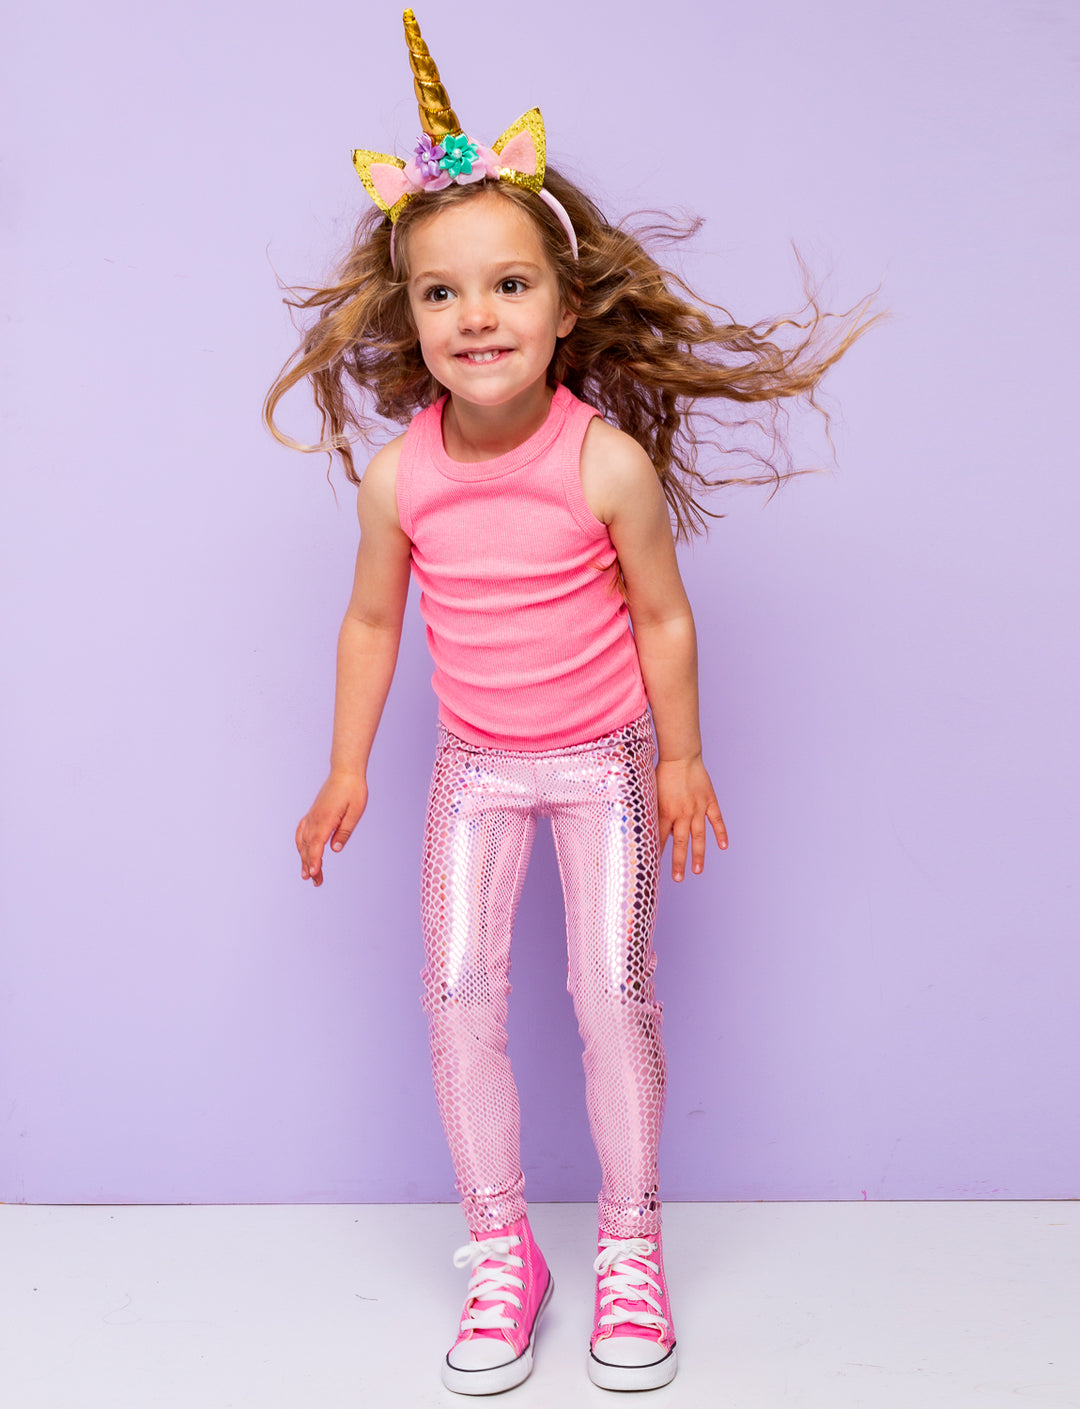 Girl wearing pink holographic snakeskin leggings with a pink vest top and unicorn headband.